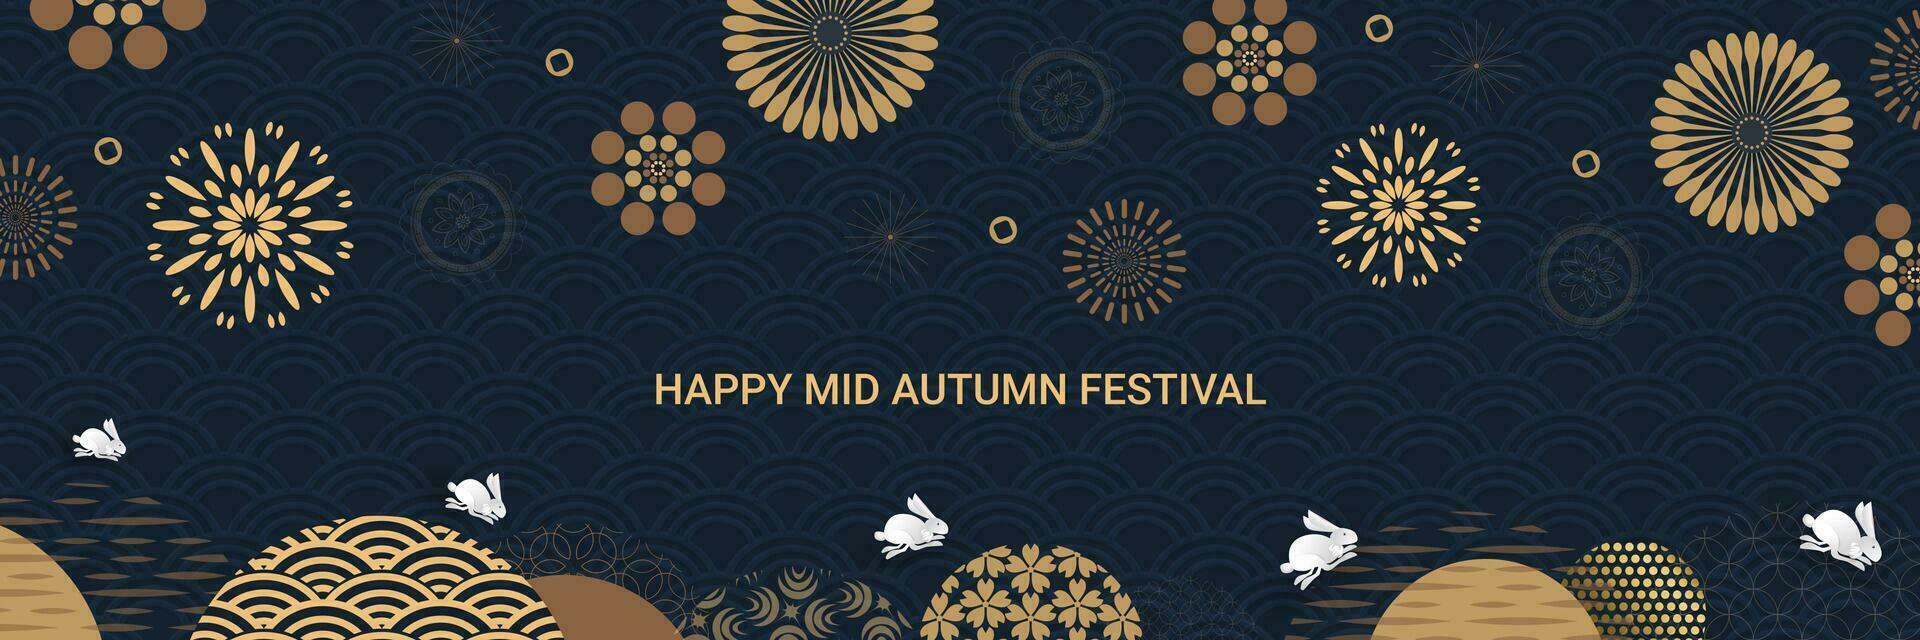 Banner design with traditional chinese full moon circles, jumping hares under the moon. Gold on a dark background. Translation from Chinese - Mid-Autumn Festival. Vector